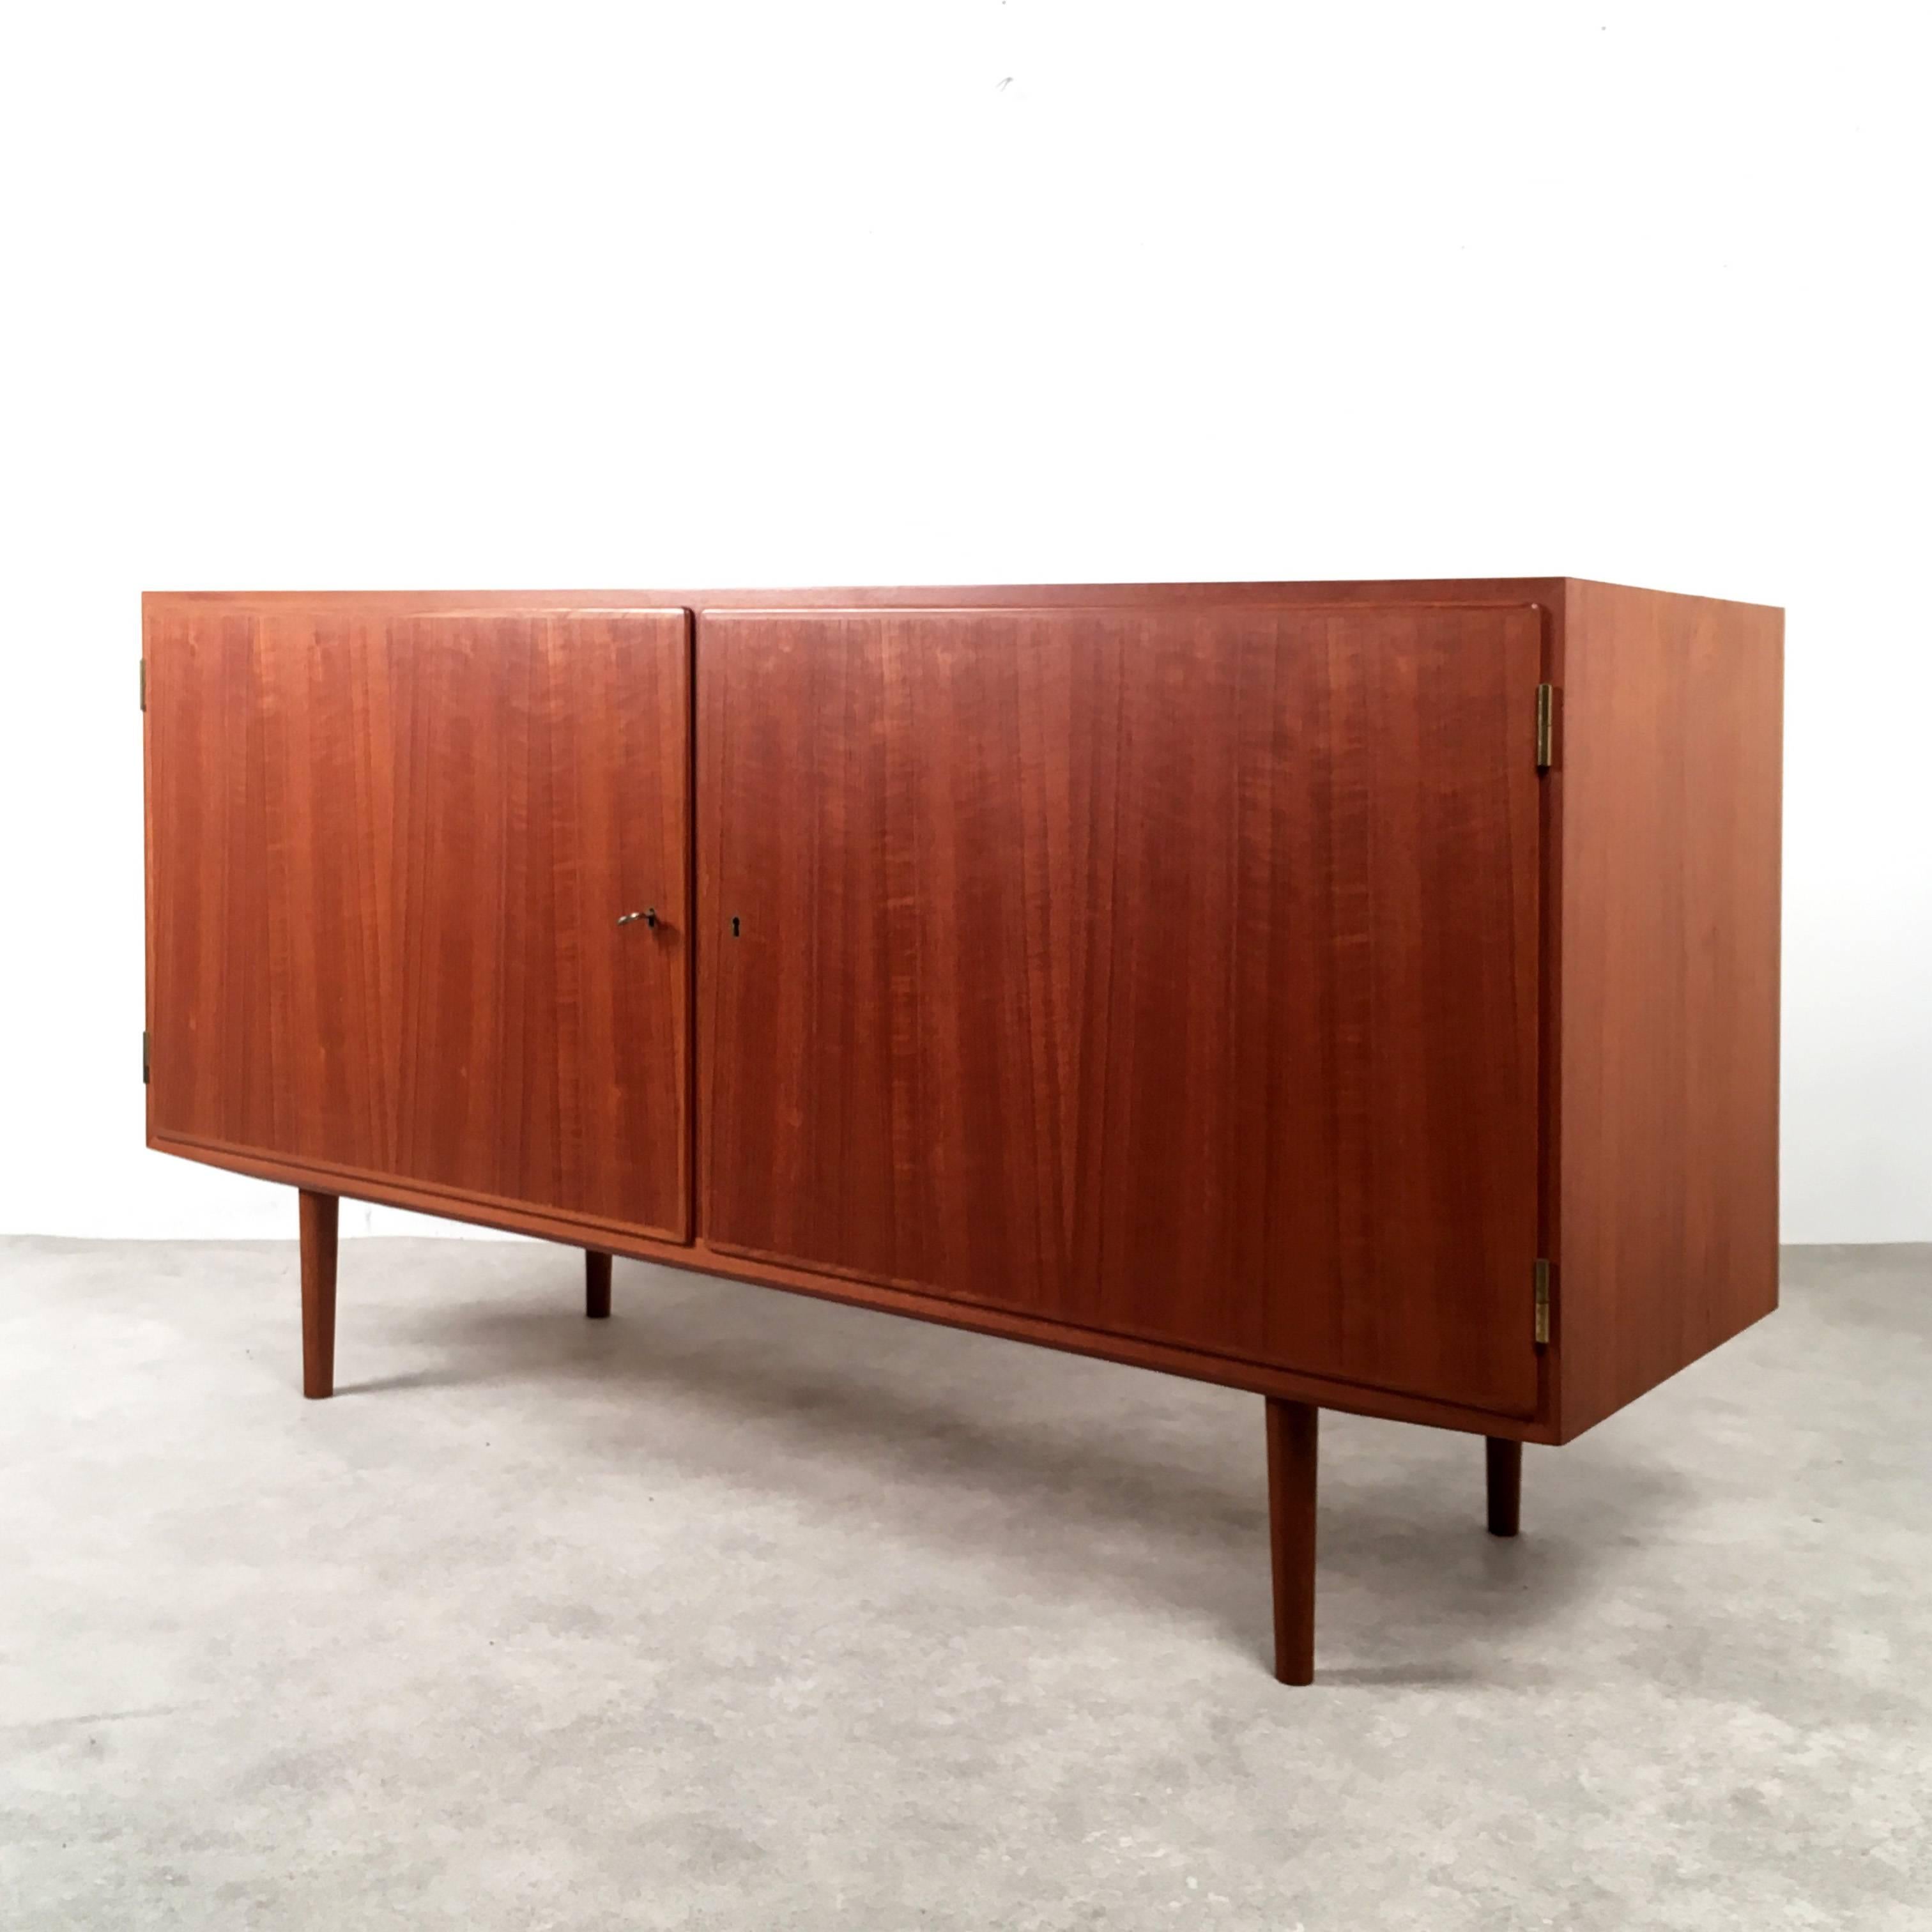 Mid-20th Century Danish Teak Sideboard by Carlo Jensen for Hundevad & Co. For Sale